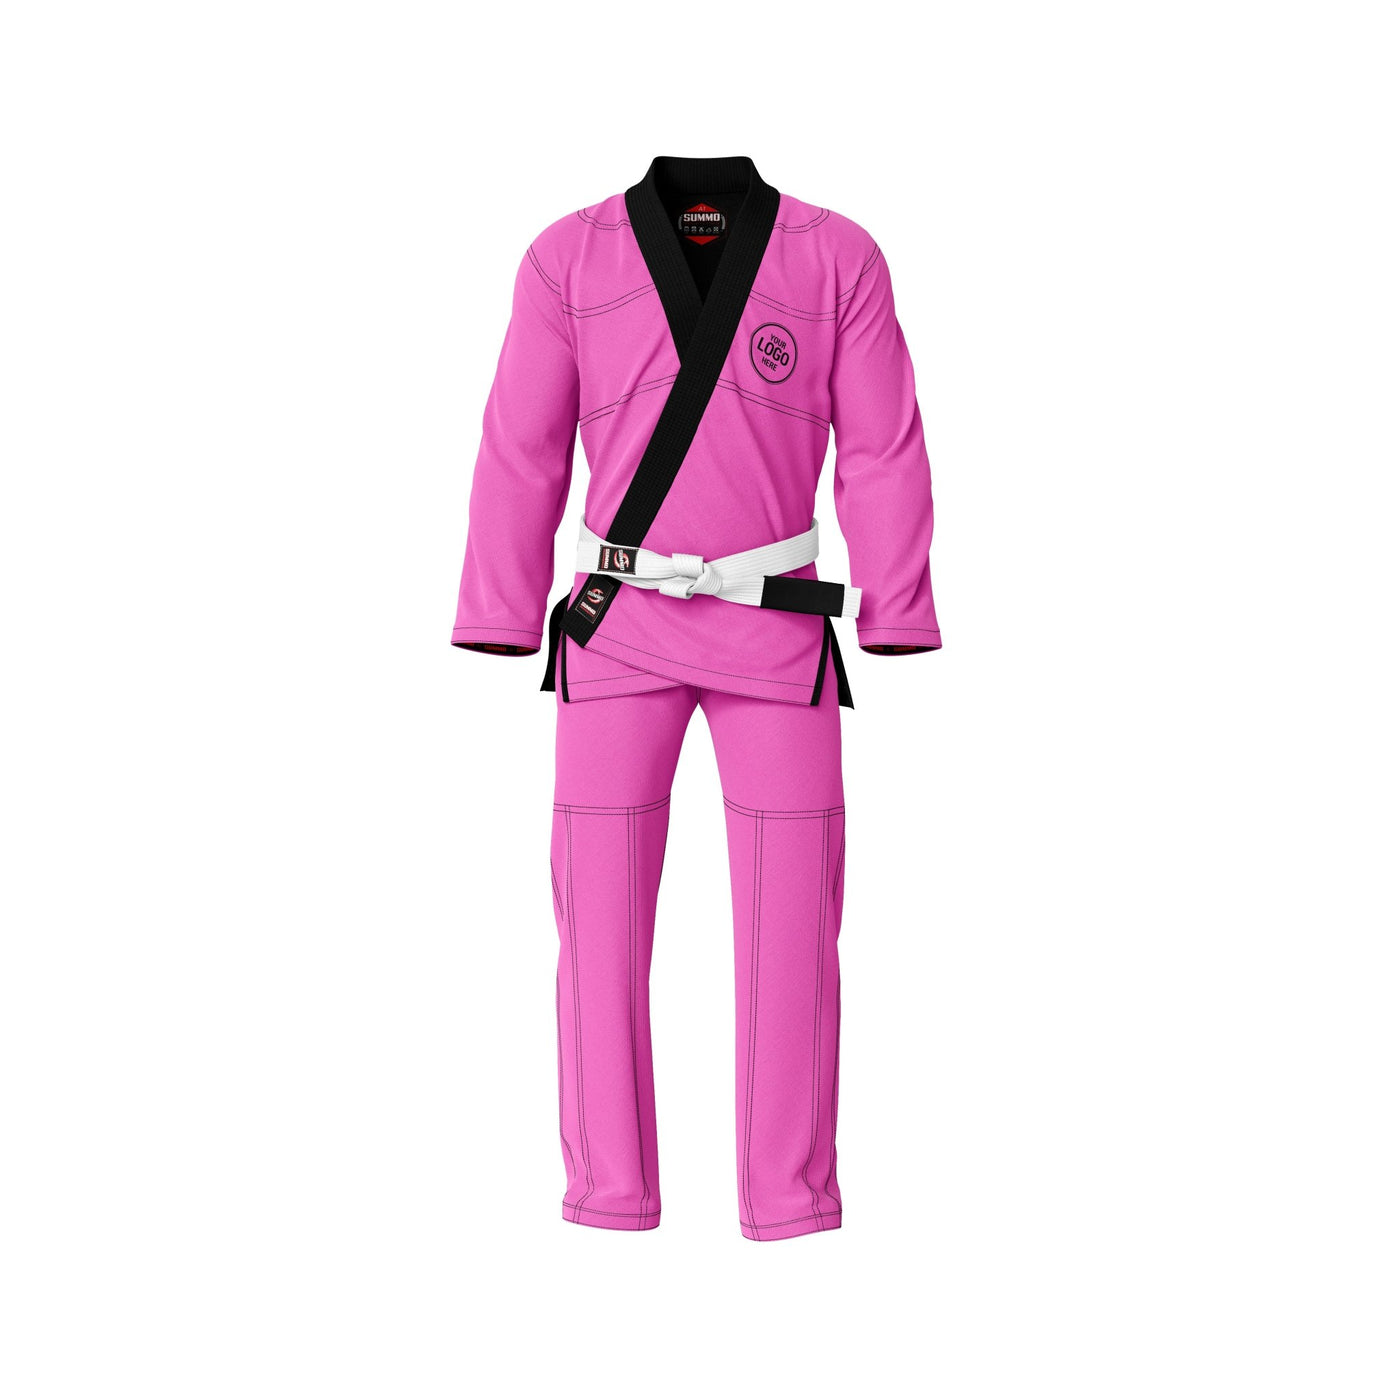 Exclusive Pink Rash Guard lining With Your Logo/Name BJJ GI - Summo Sports